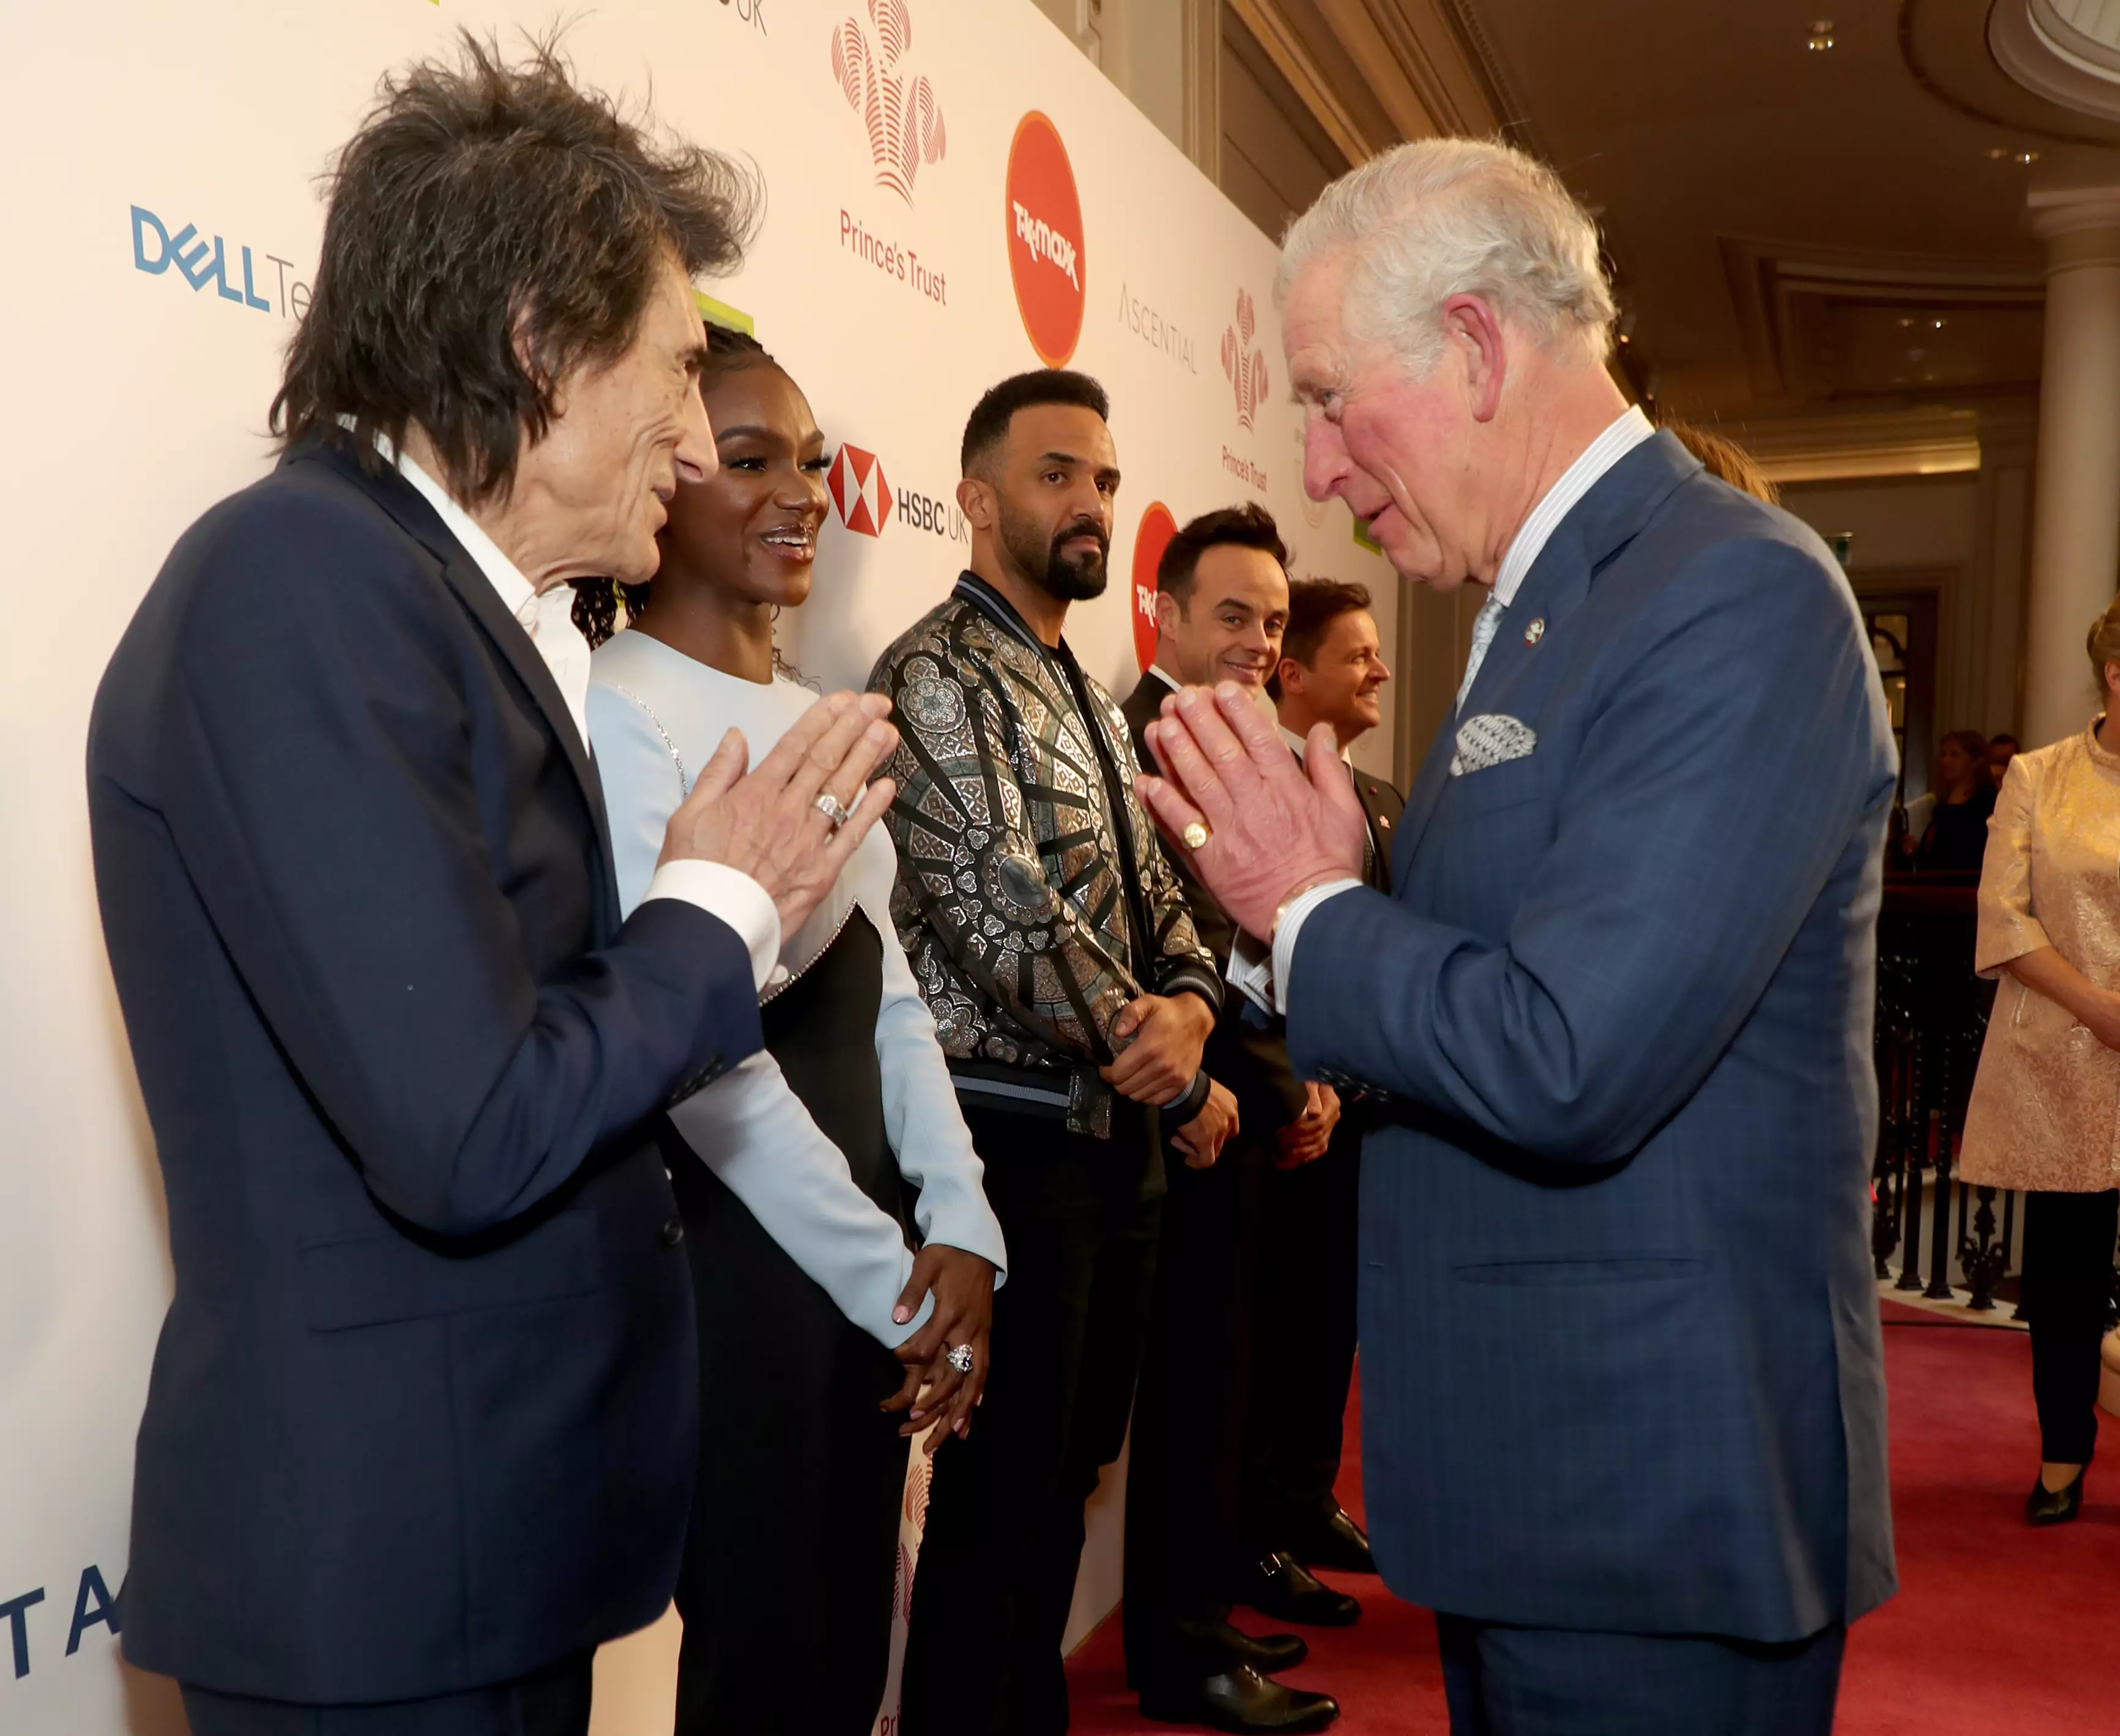 Prince Charles alongside Ronnie Wood earlier this month.